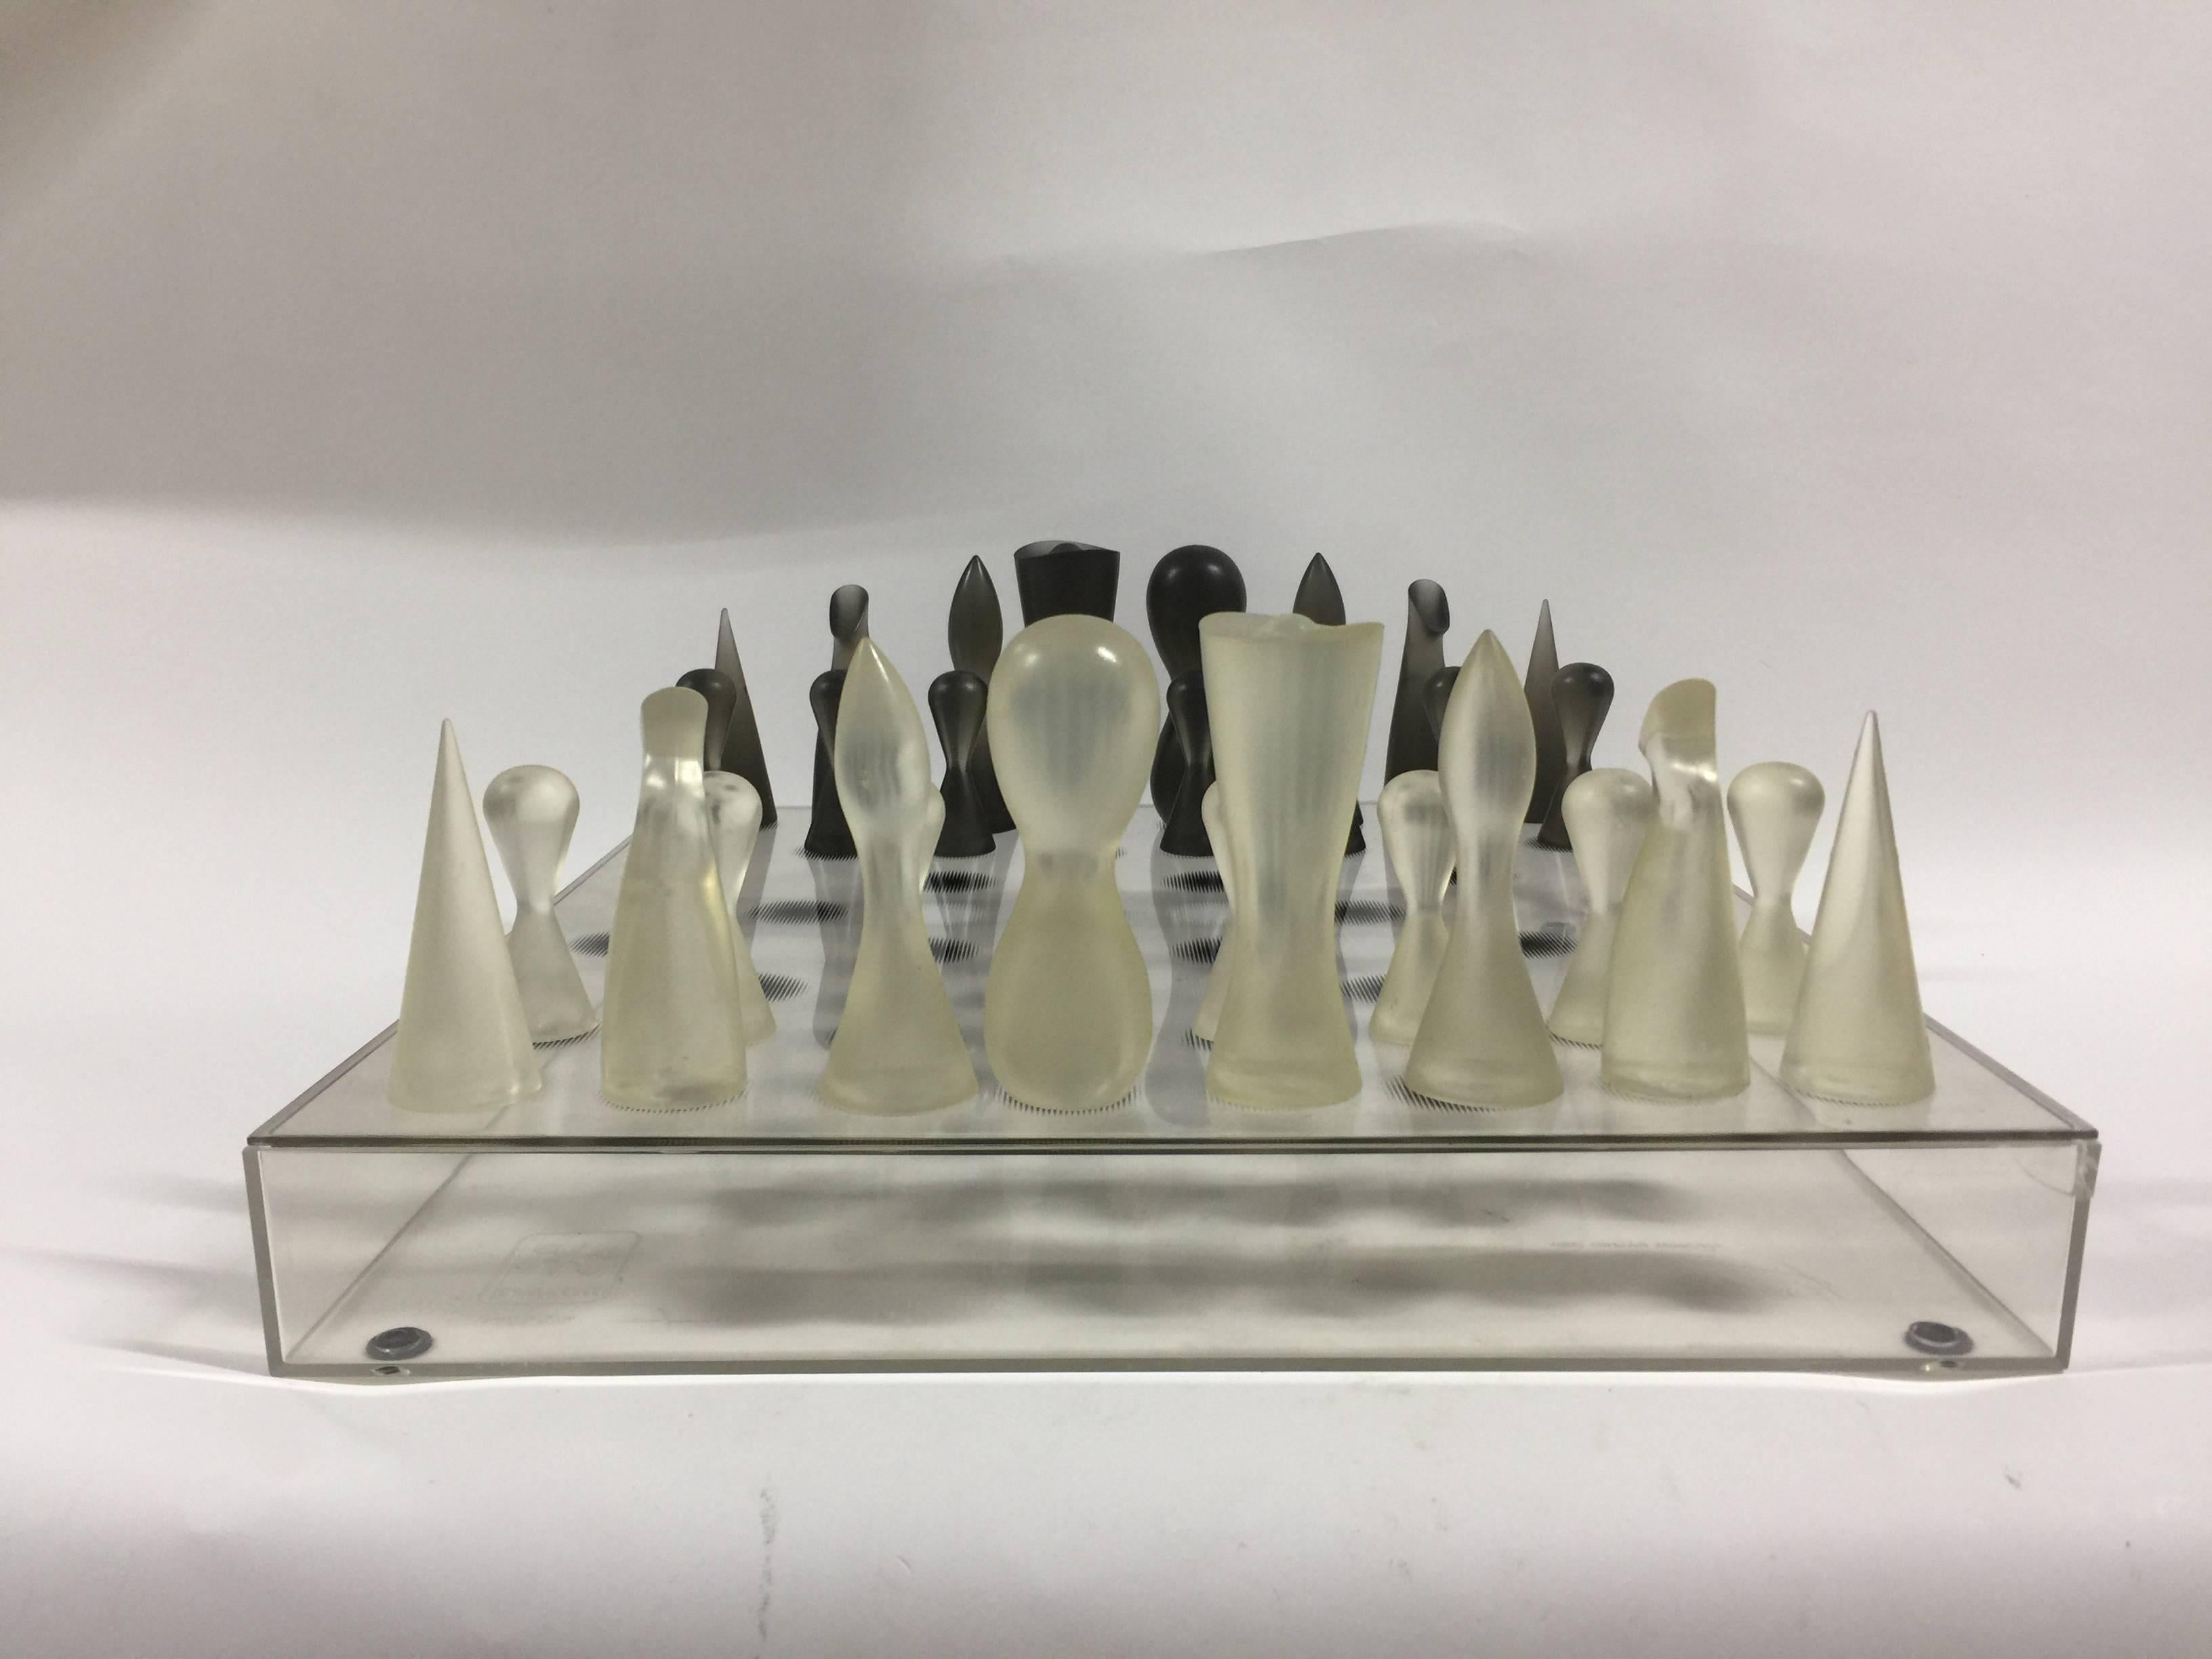 A Minimalist Lucite chess set designed by Karim Rashid (born 1960) for Bozart. Made in USA, circa 2001. Signed.

Made of thermoplastic rubber pieces in black and white with an acrylic see-through board, this chess set is in the collection of the